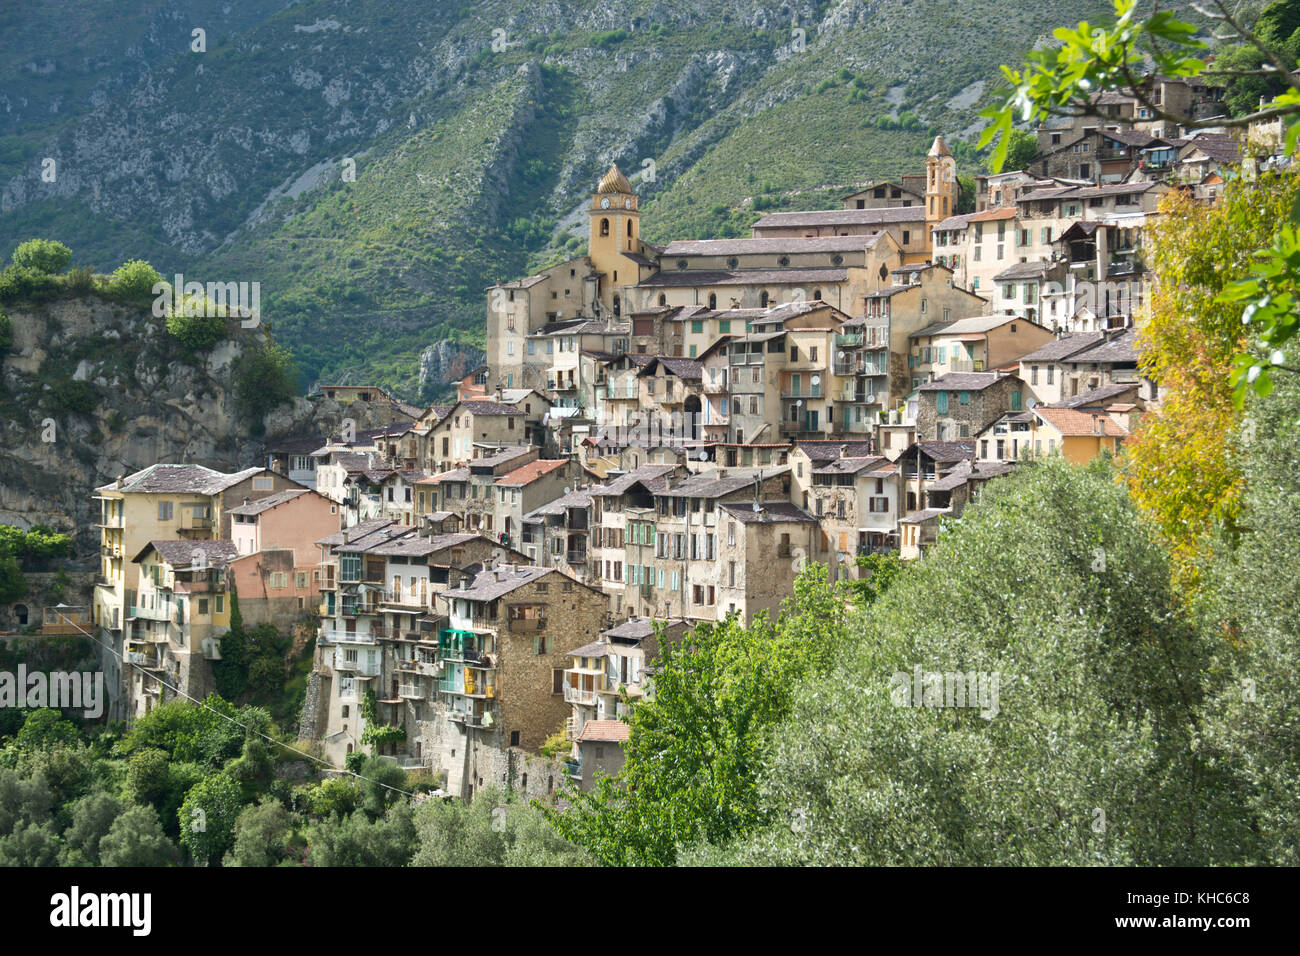 Picturesque French mountain village Saorge *** Local Caption *** France, Alpes du Sud, Mercantour, Saorge, village, old, ancient, mountains, hills, tr Stock Photo